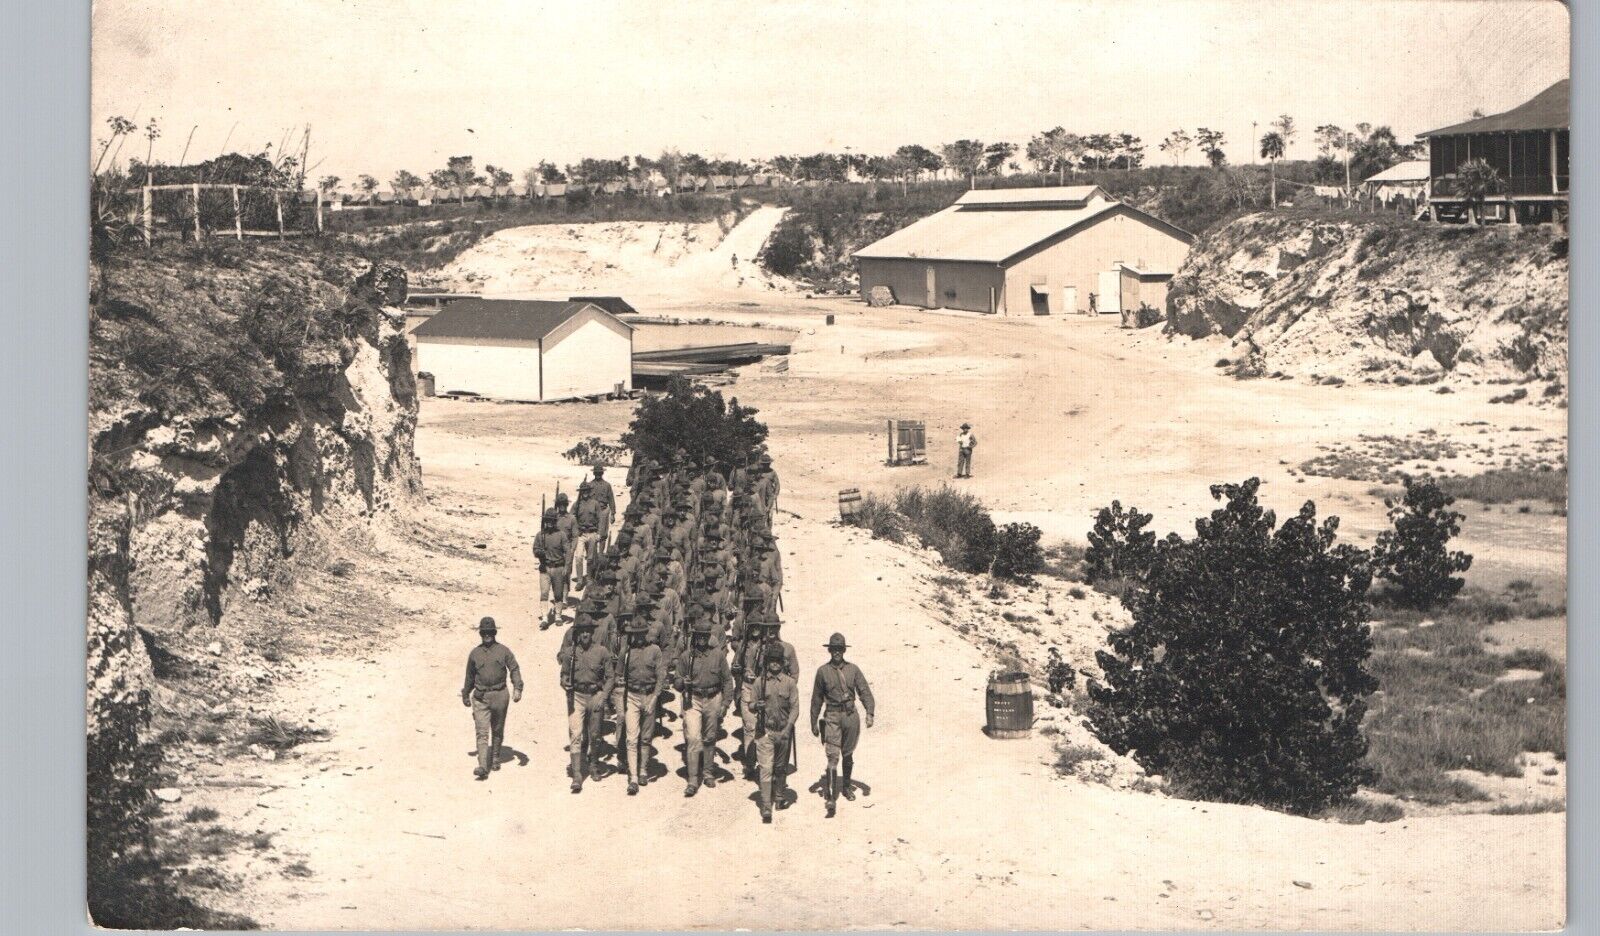 US SOLDIERS MARCHING mexico border war? real photo postcard rppc army base camp